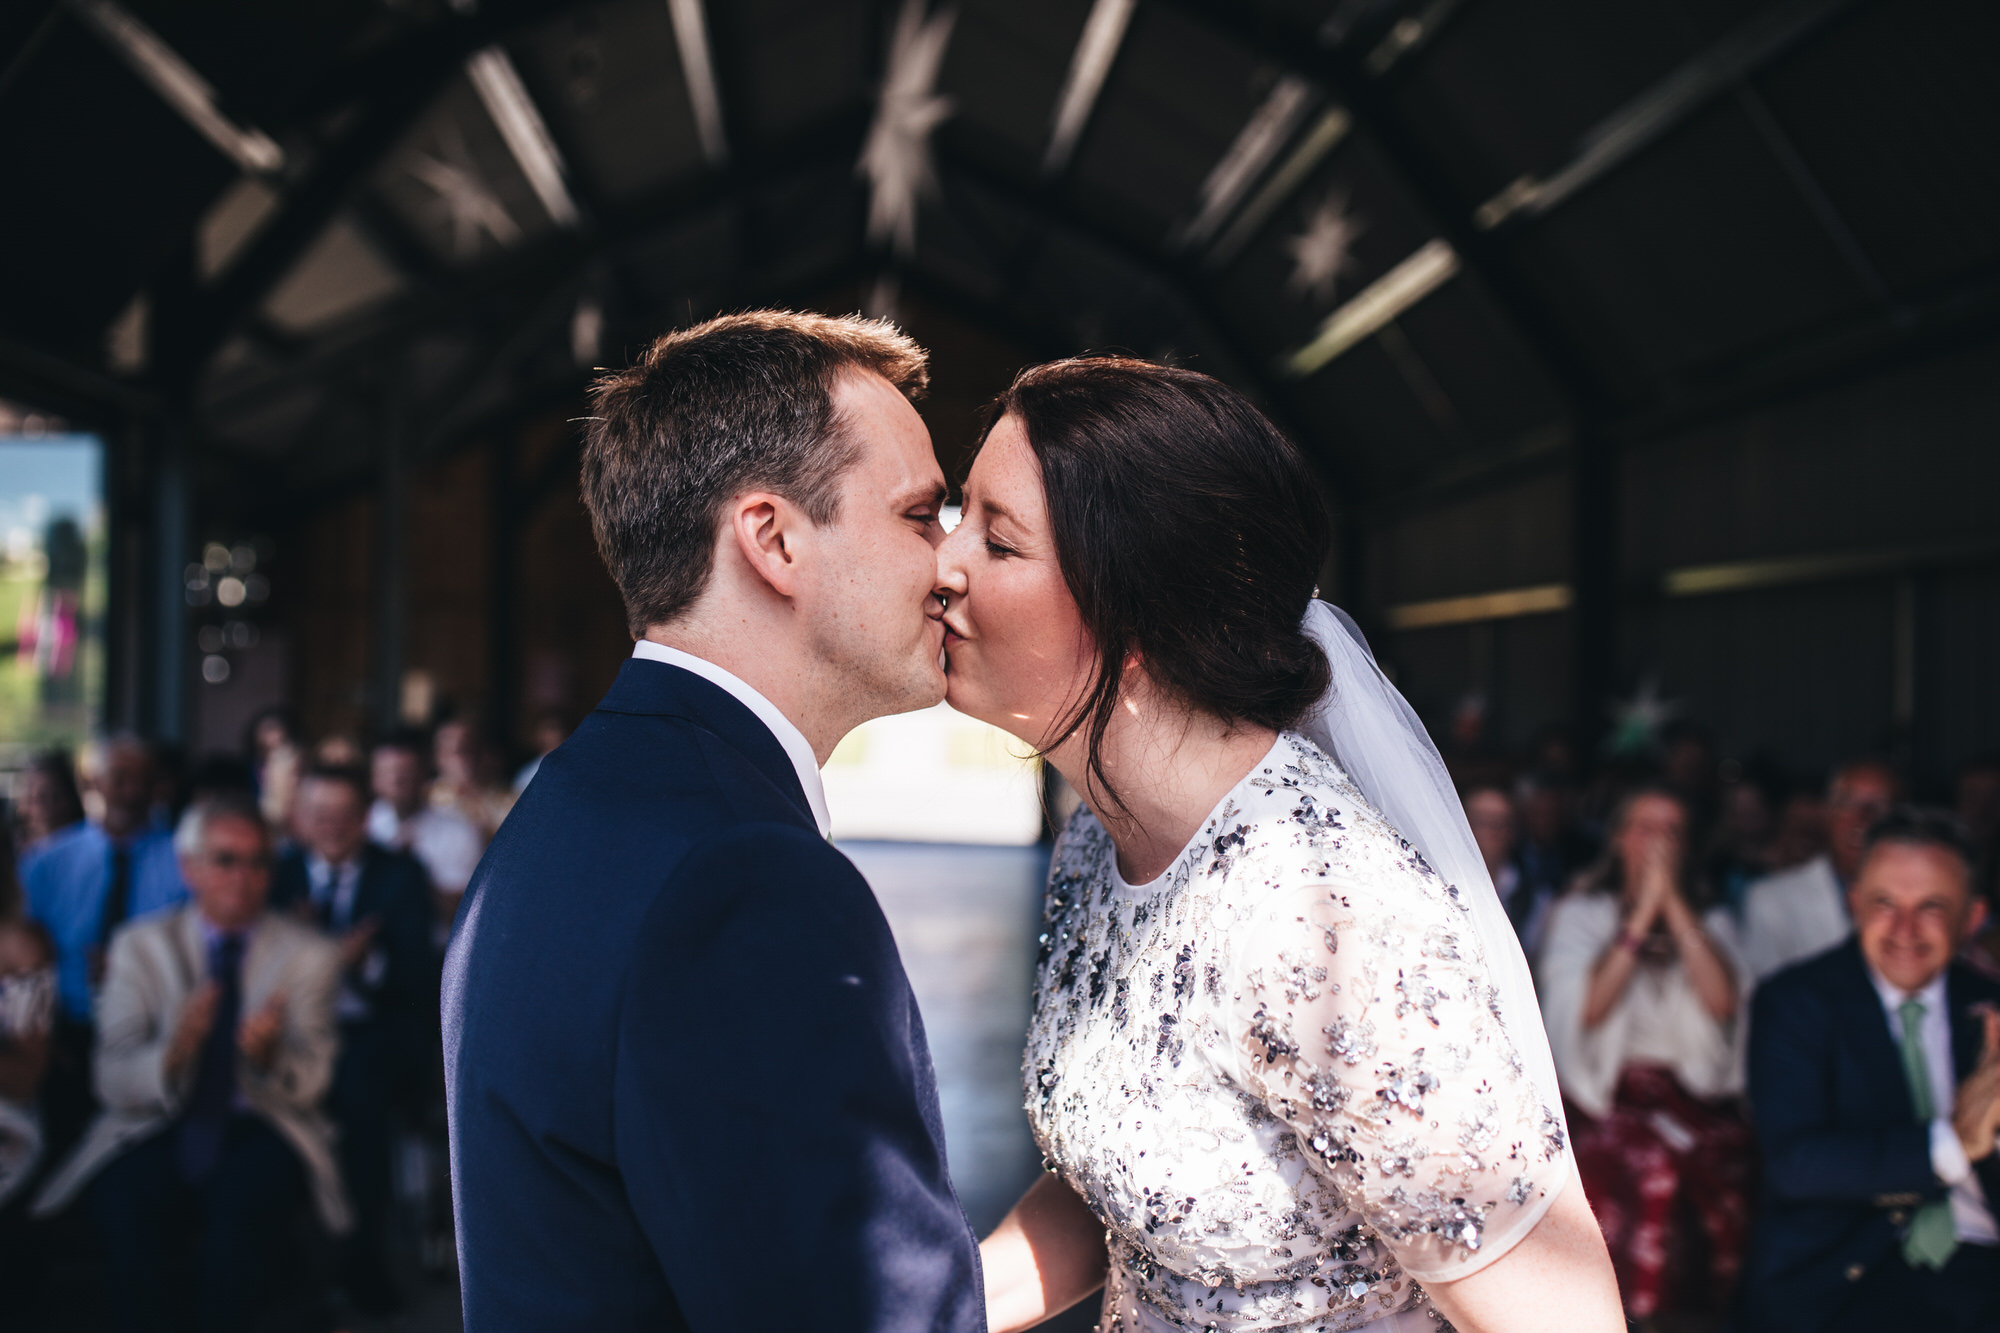 couple kiss after ceremony at wedding